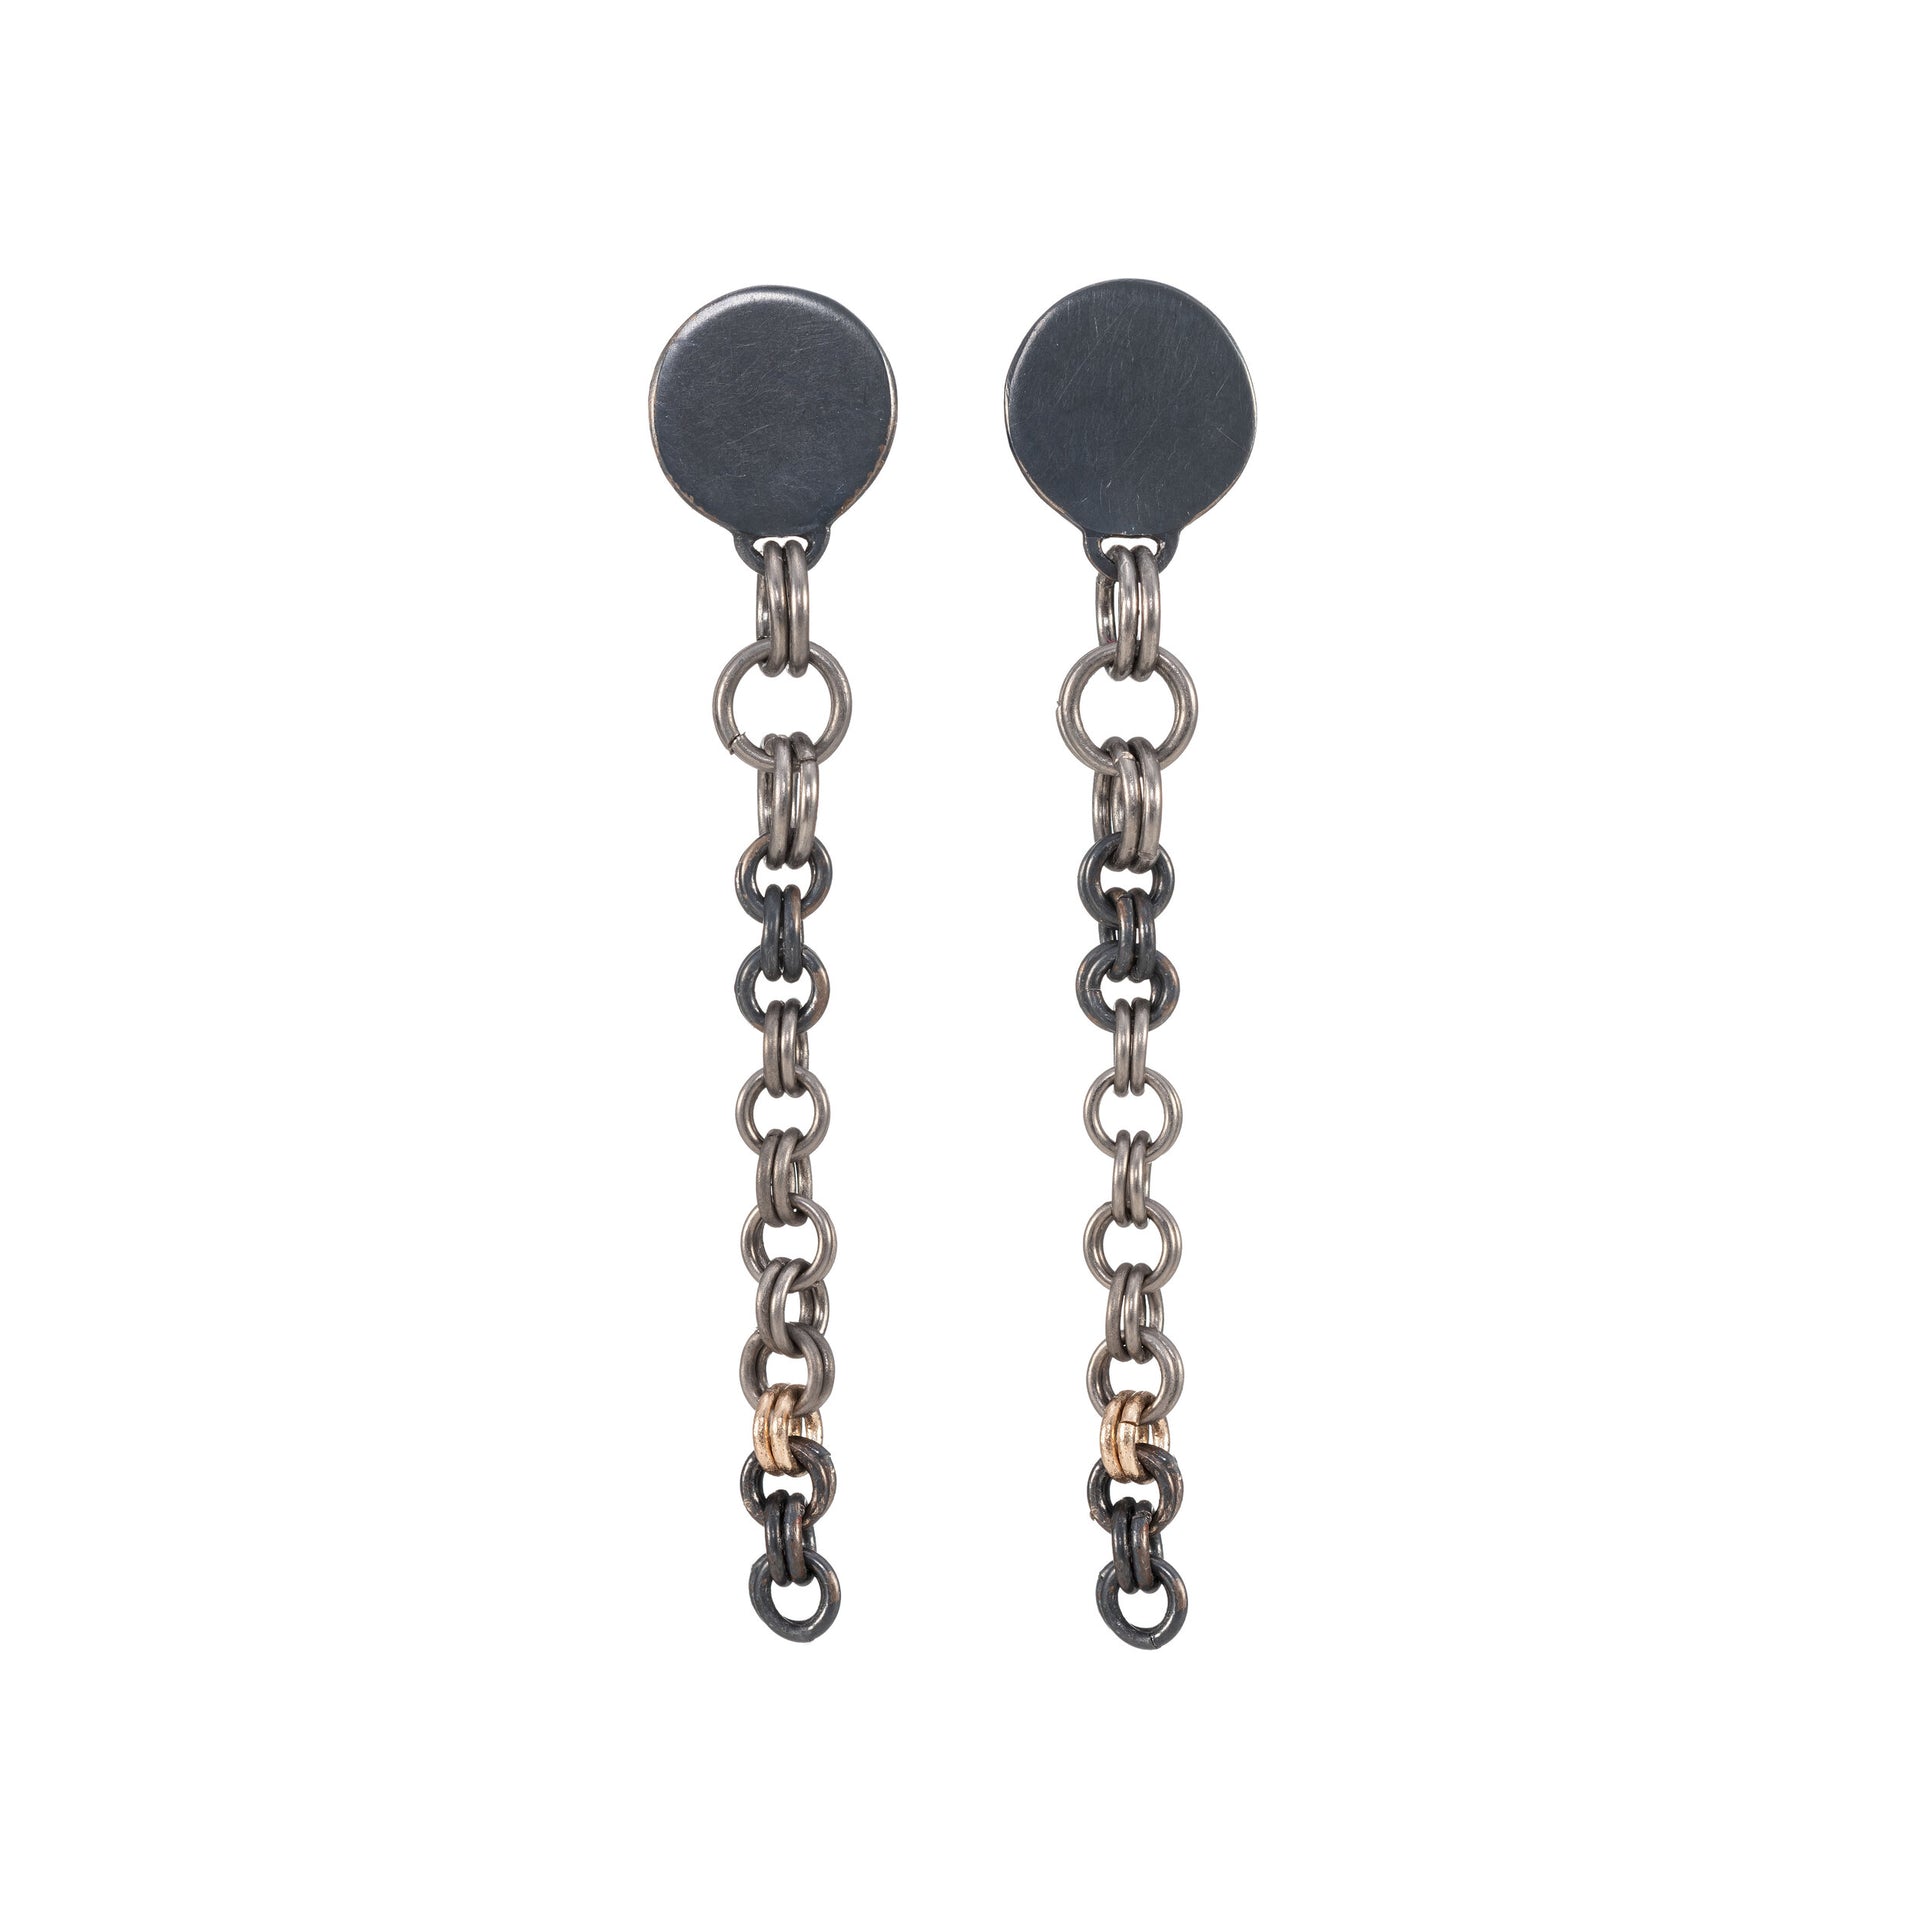 Night Moon chain stud drop earrings. Contemporary jewellery oxidised silver, 9ct yellow gold and titanium, delicate jewellery by Corrinne Eira Evans